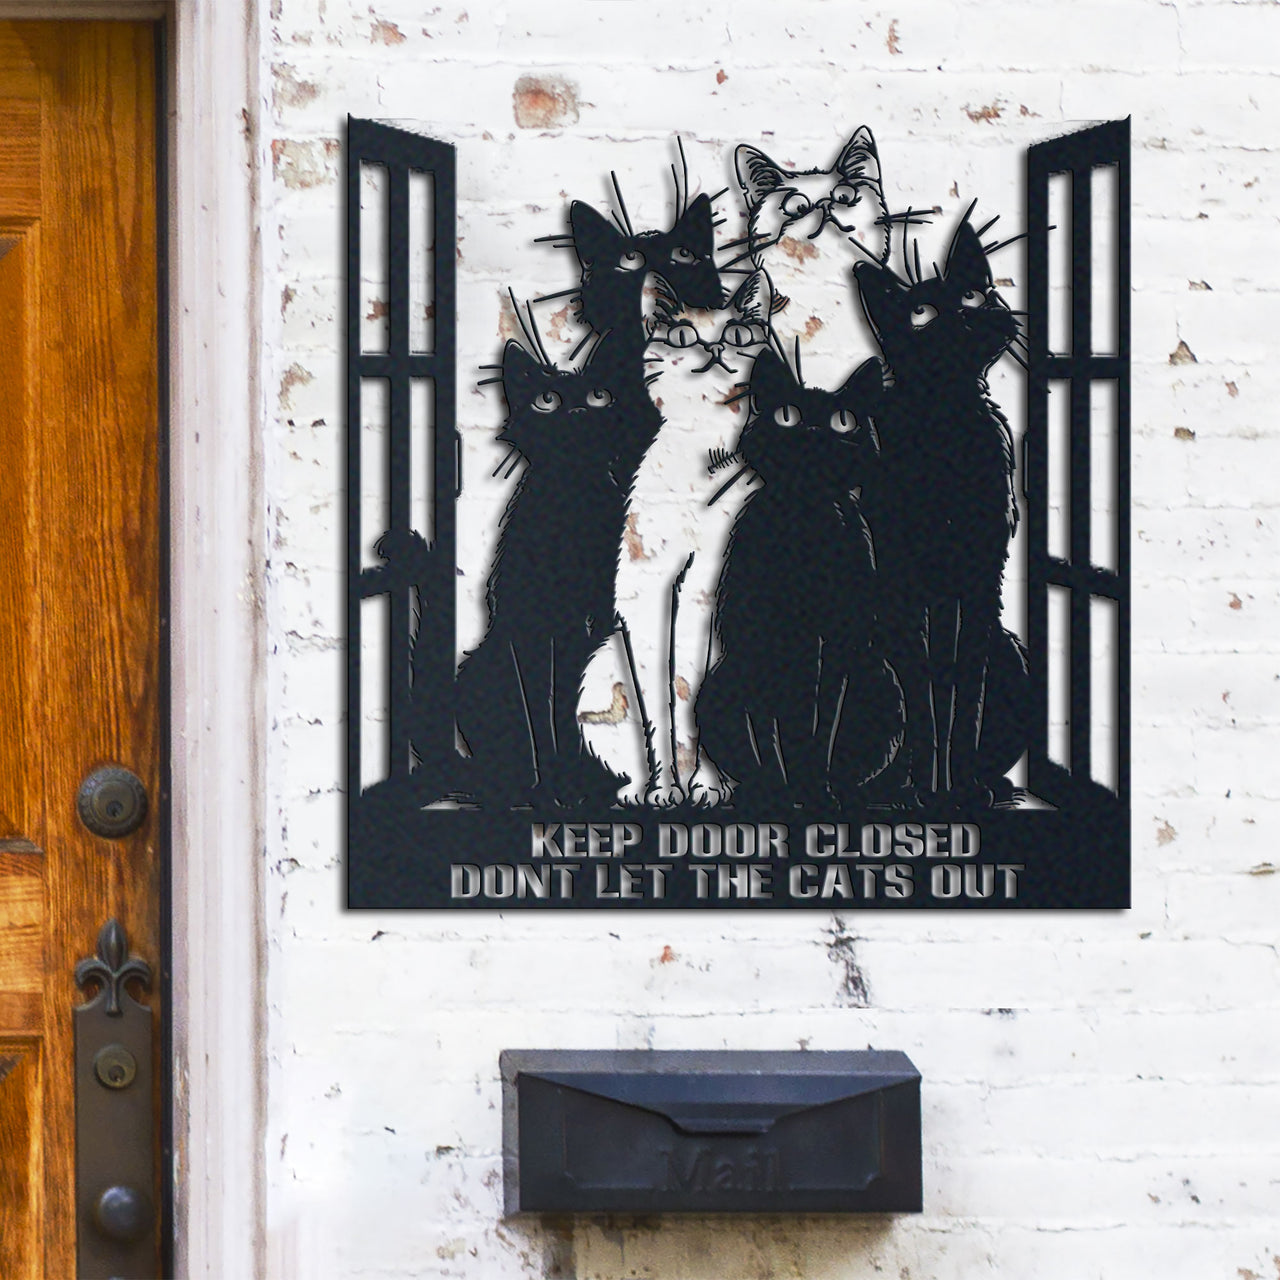 Cat Lover Metal Sign - Charming "Keep Closed Door" Sign for Cat Homes, Perfect Cat Owner Gift